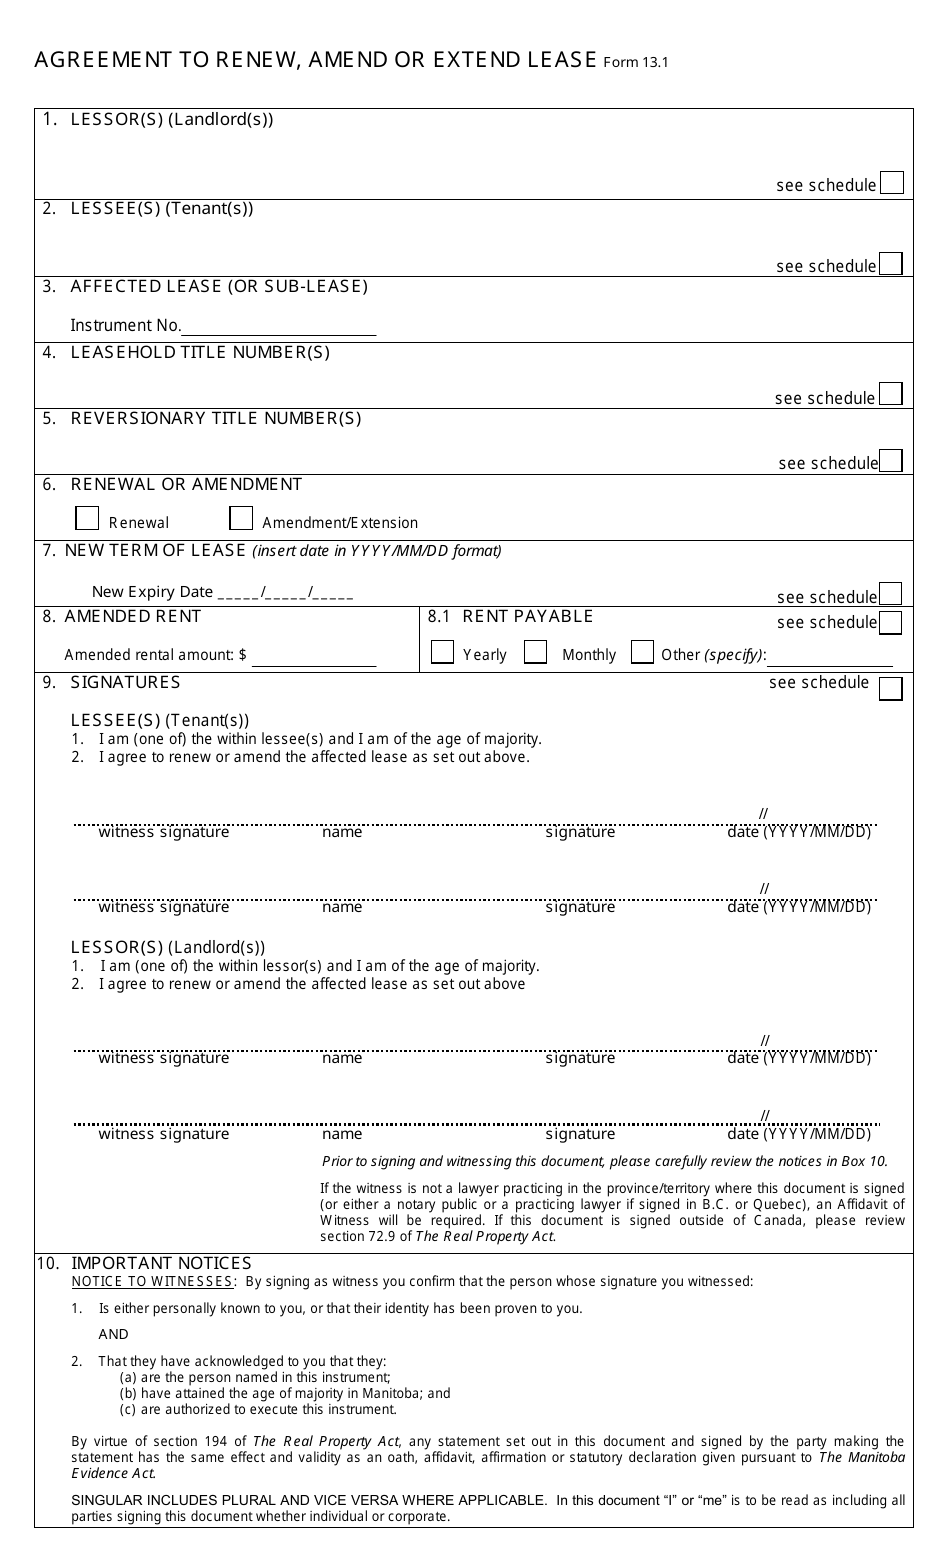 Agreement Template to Renew, Amend or Extend Lease - Manitoba, Canada, Page 1